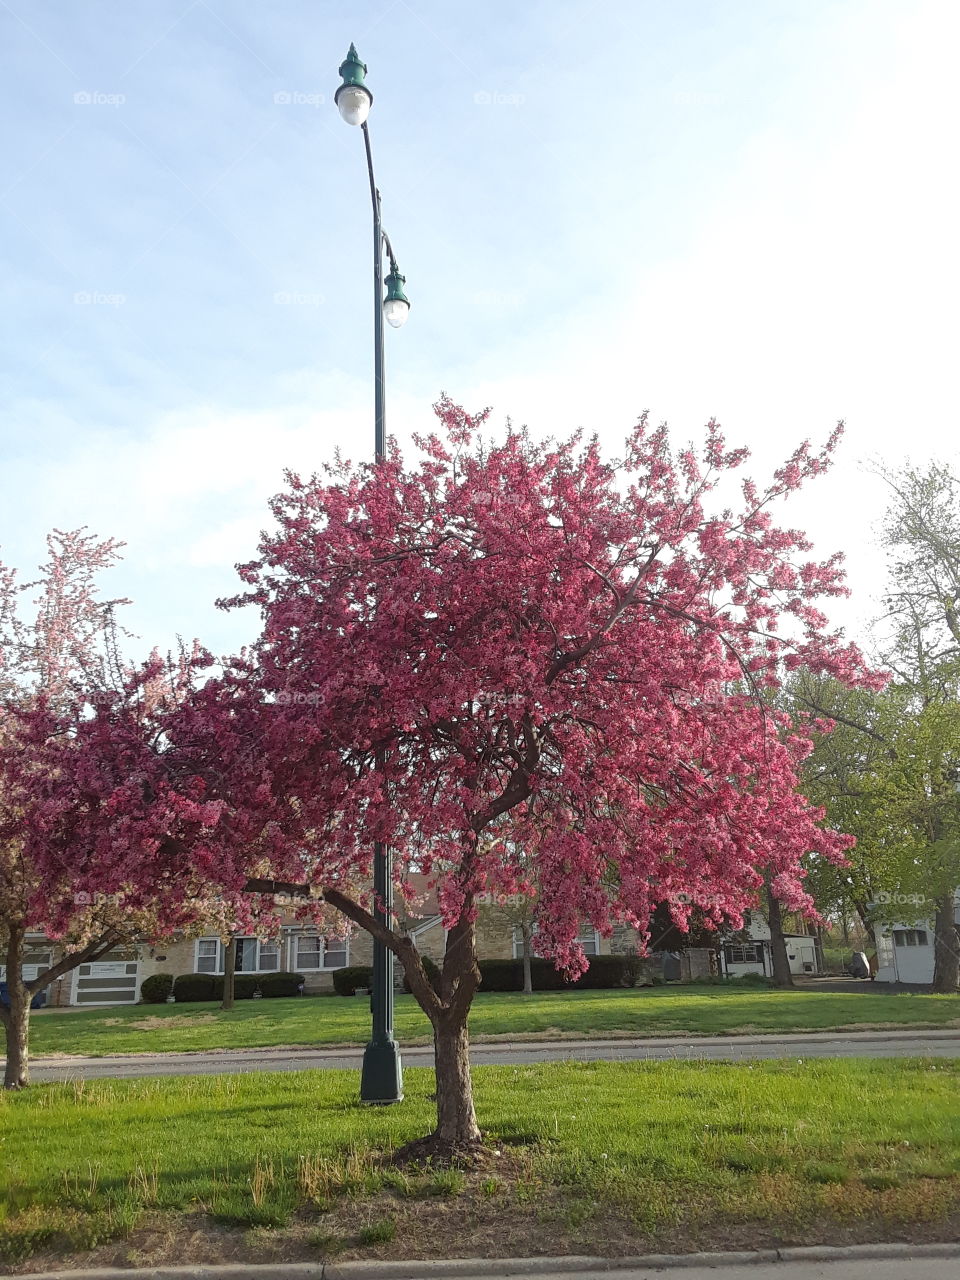 Spring Tree Blossoms with very blue sky along with a lampost